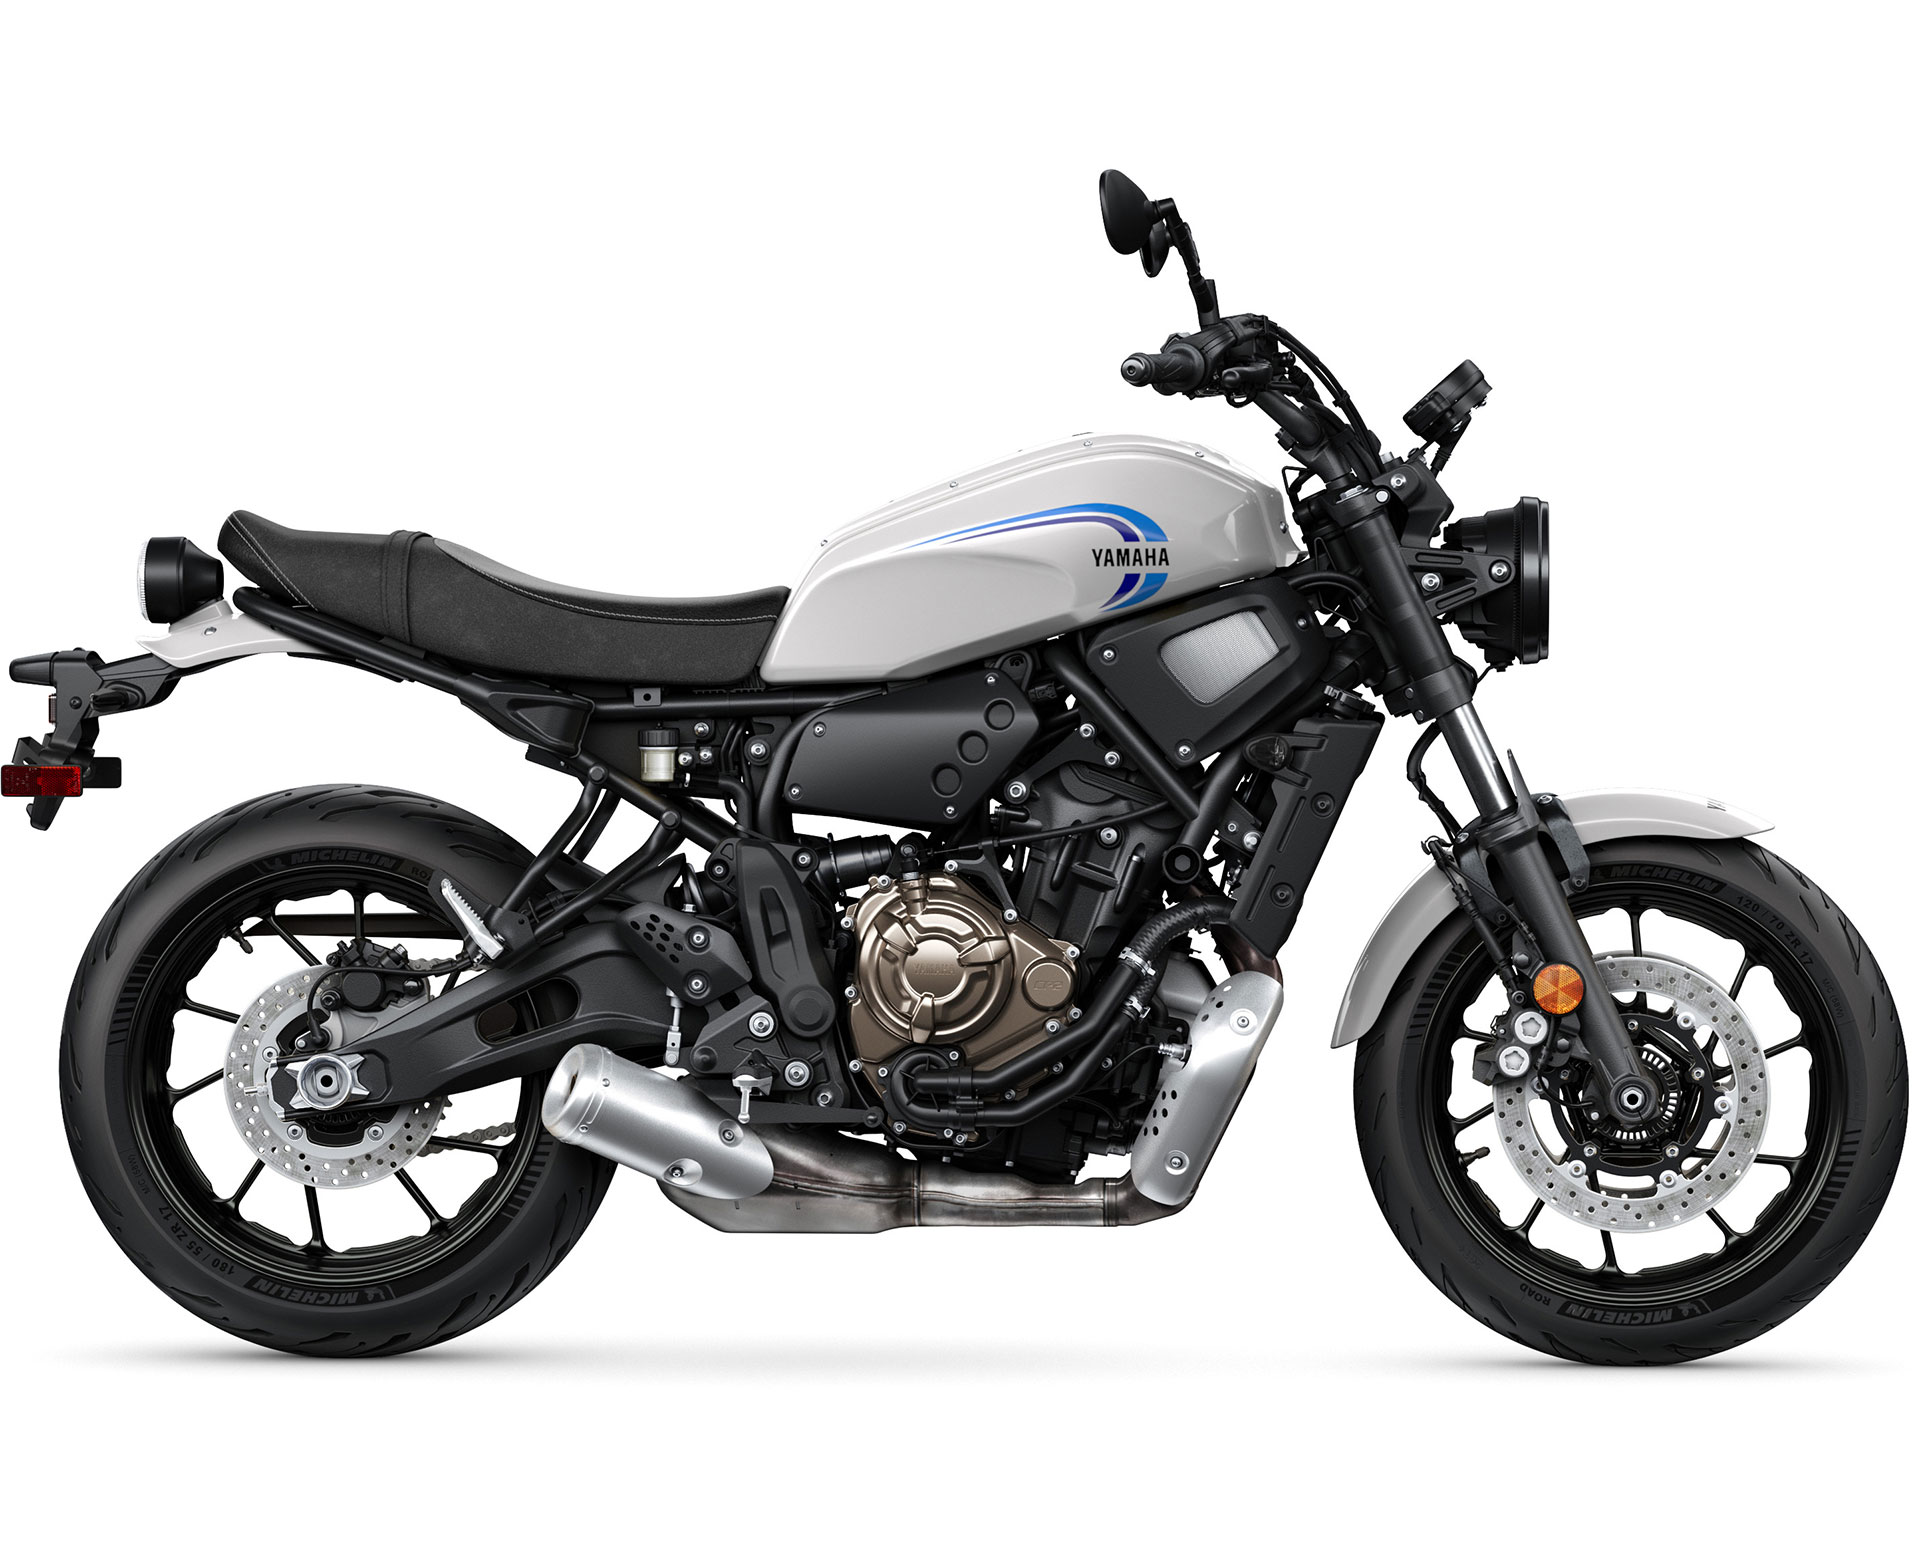 Thumbnail of your customized 2022 XSR700